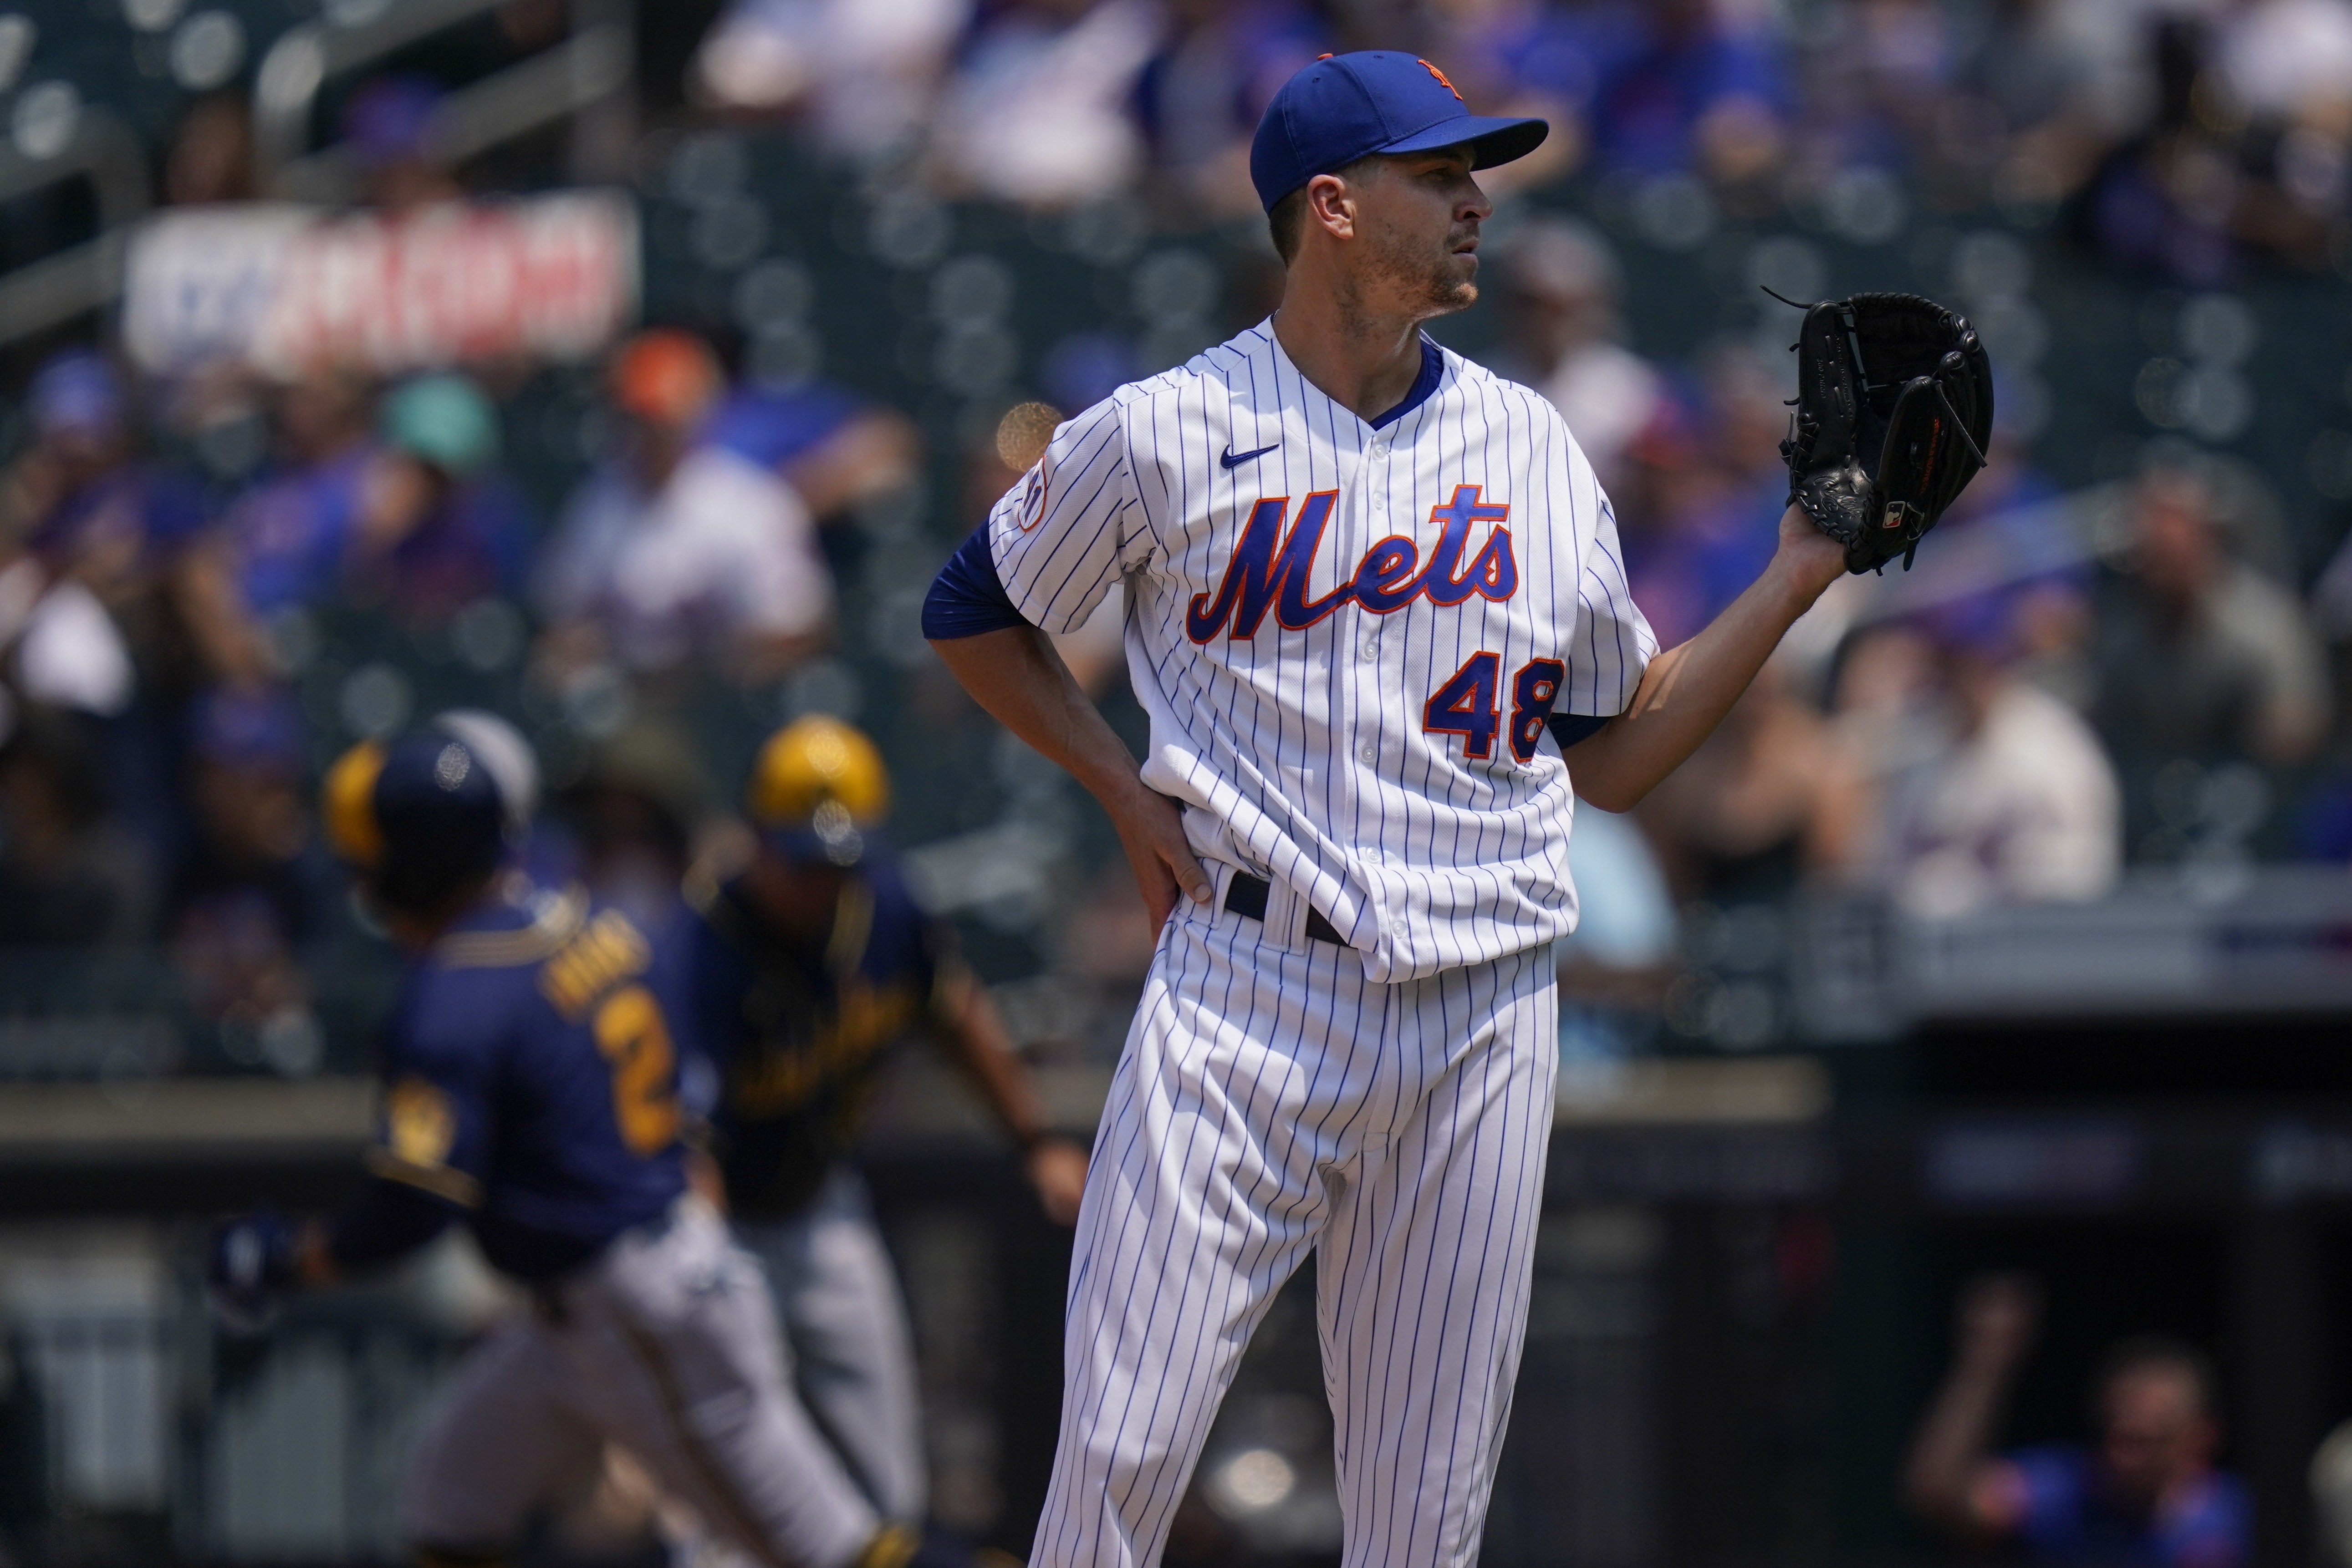 Jacob deGrom is better than ever as Mets make playoff push